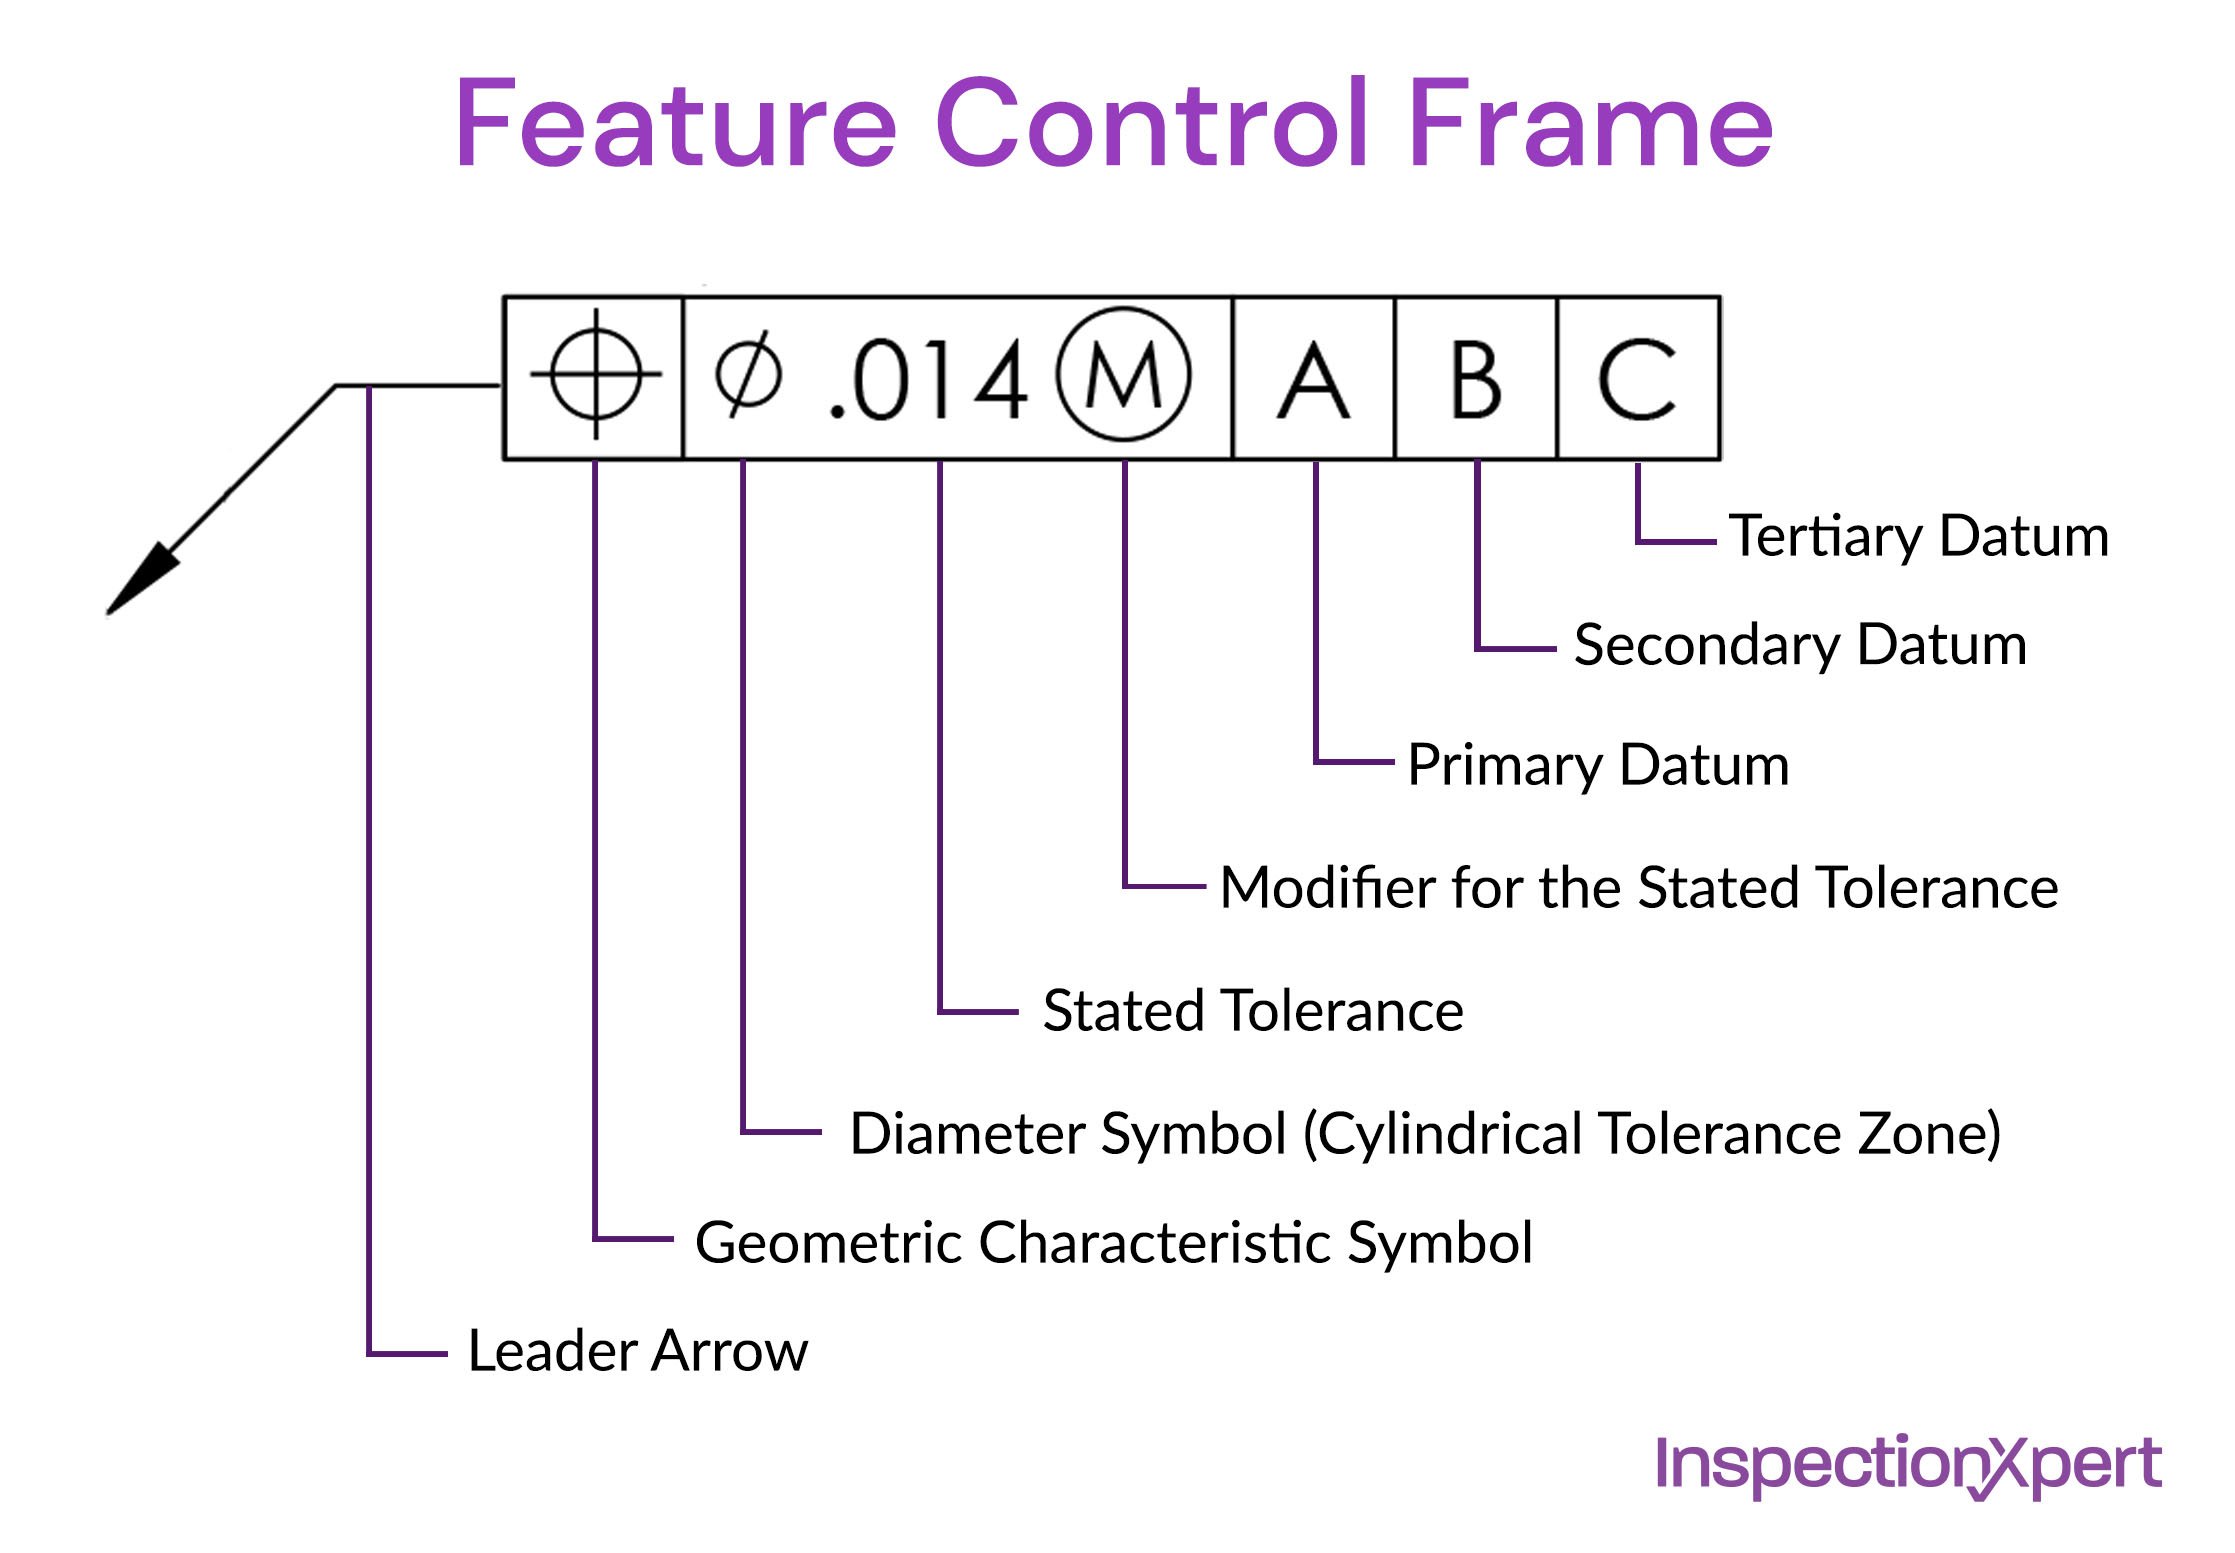 How to read a feature control frame for GD&T